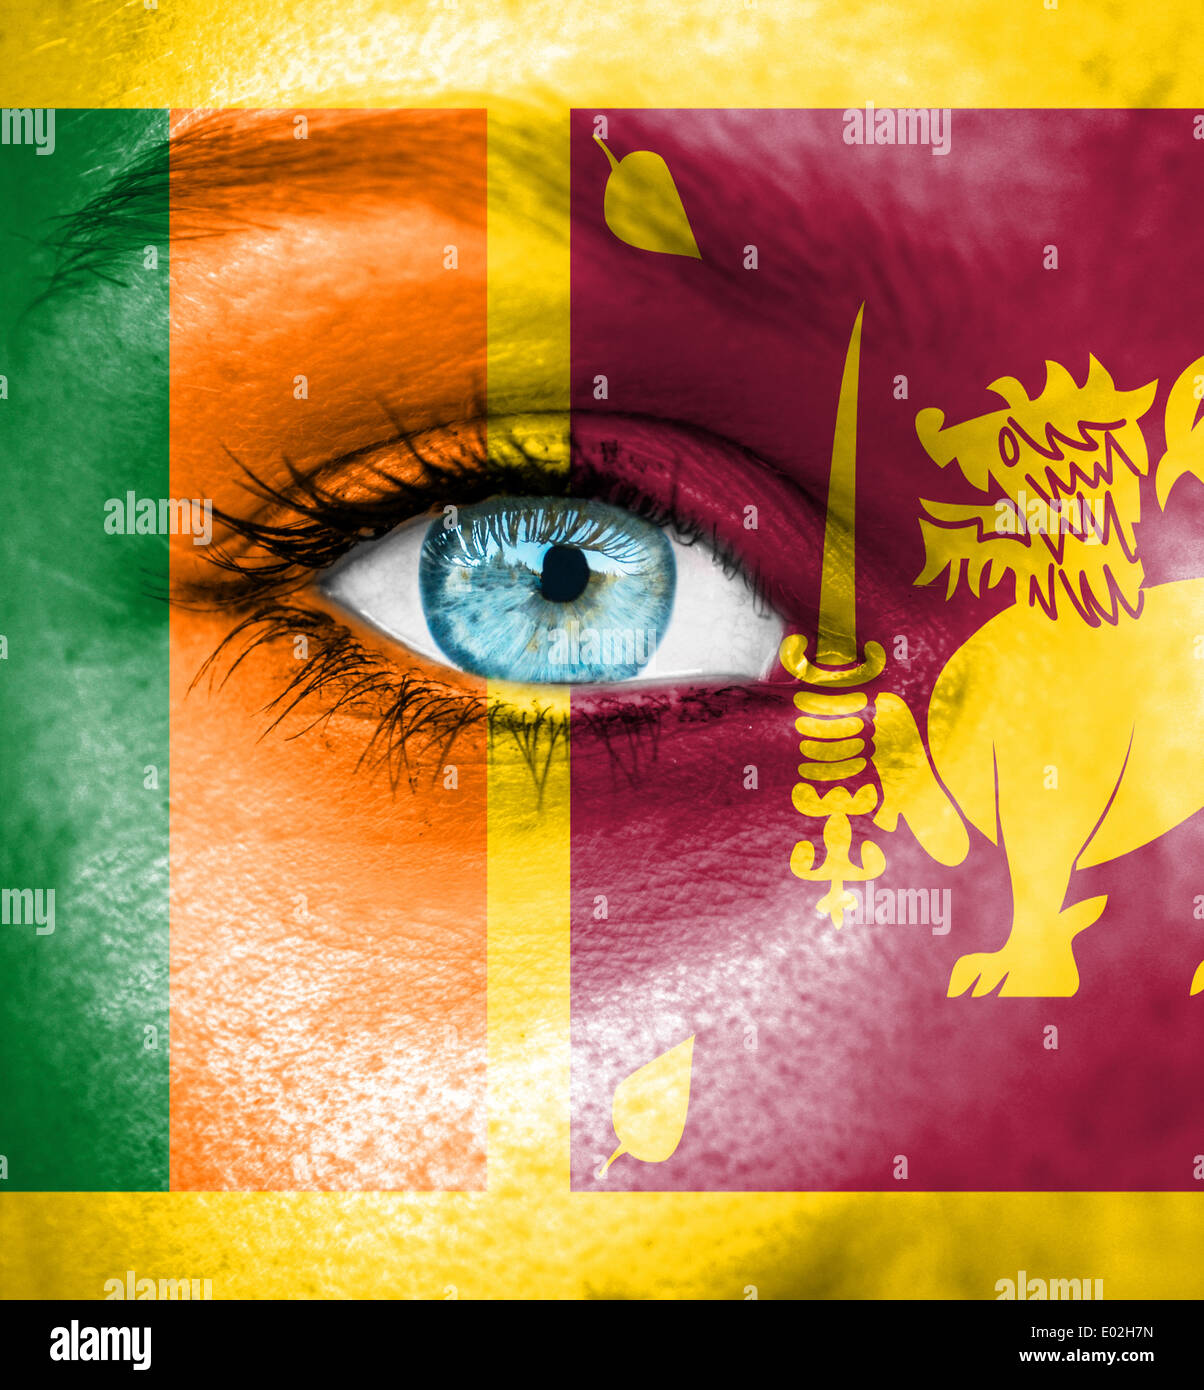 Woman face painted with flag of Sri Lanka Stock Photo